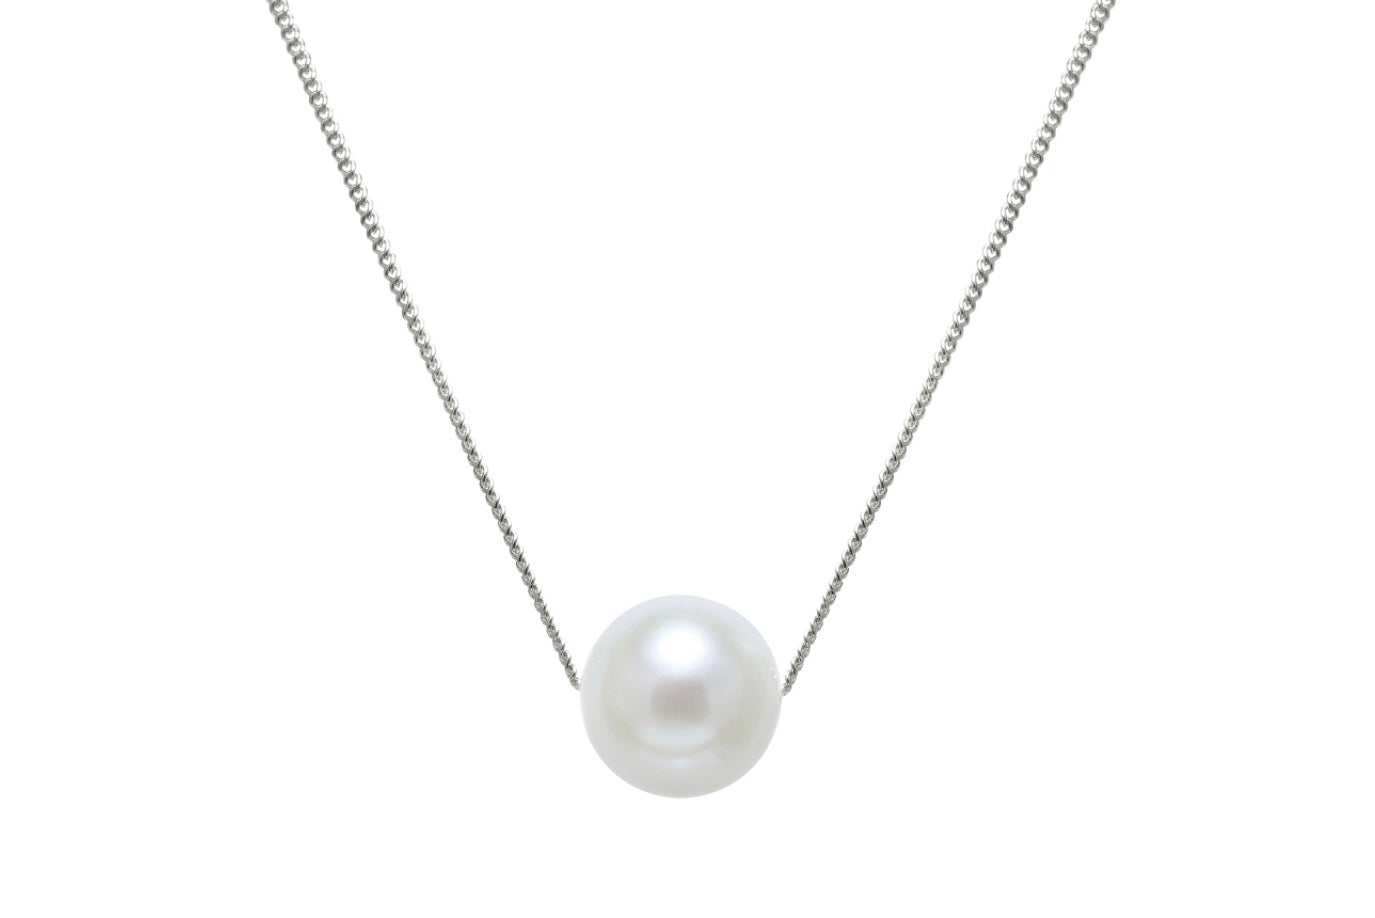 9ct white gold floating pearl necklace